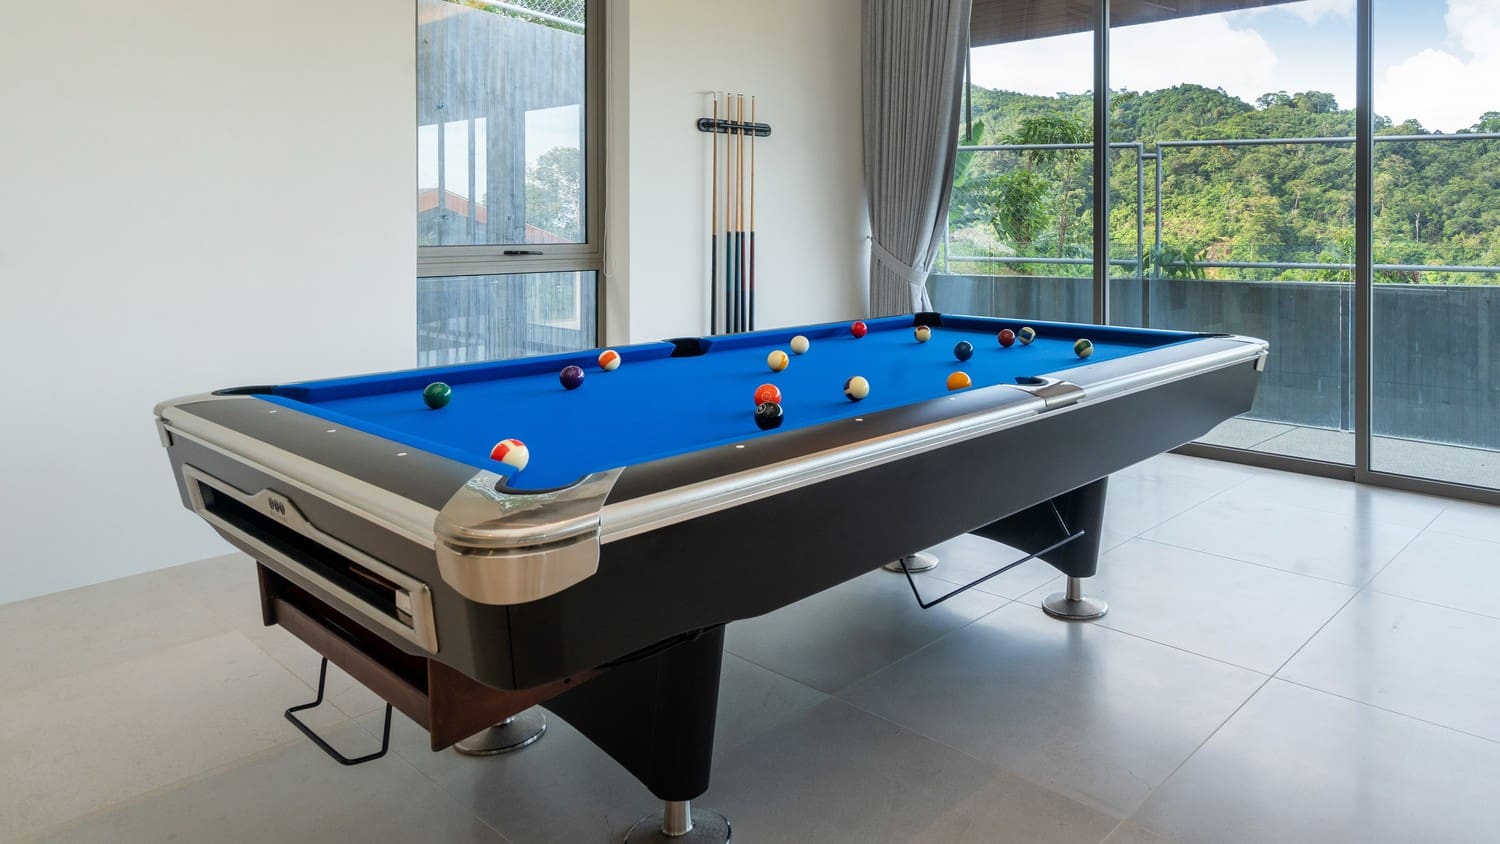 A beautiful pool table with blue felt in a bright room with floor to ceiling glass windows.